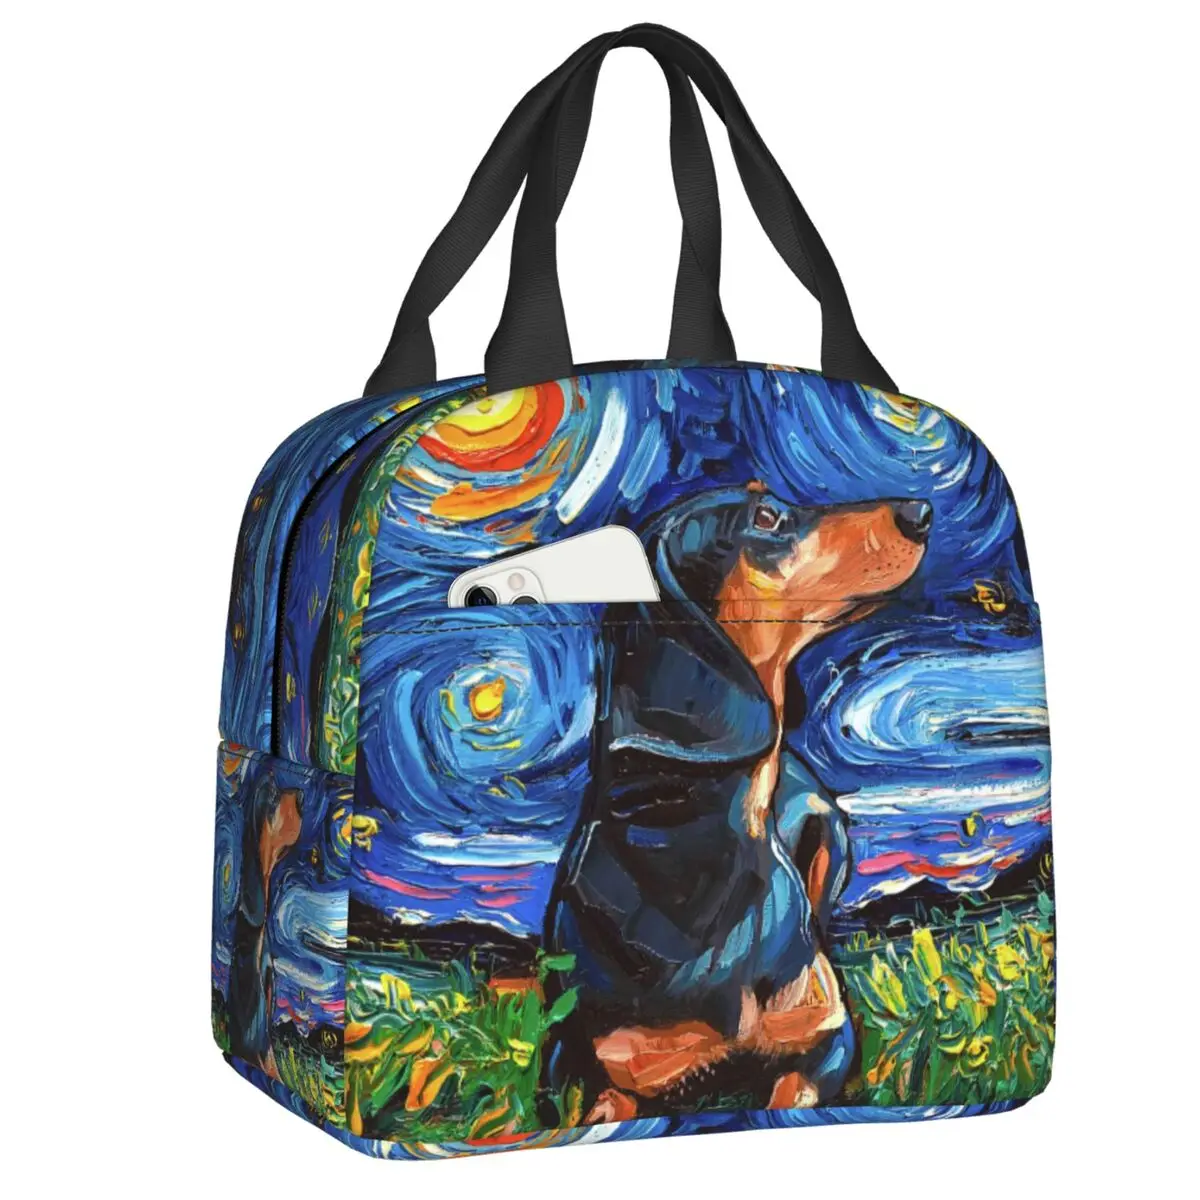 

Dachshund Thermal Insulated Lunch Bag Women Badger Sausage Wiener Dog Portable Lunch Container for Work School Food Bento Box